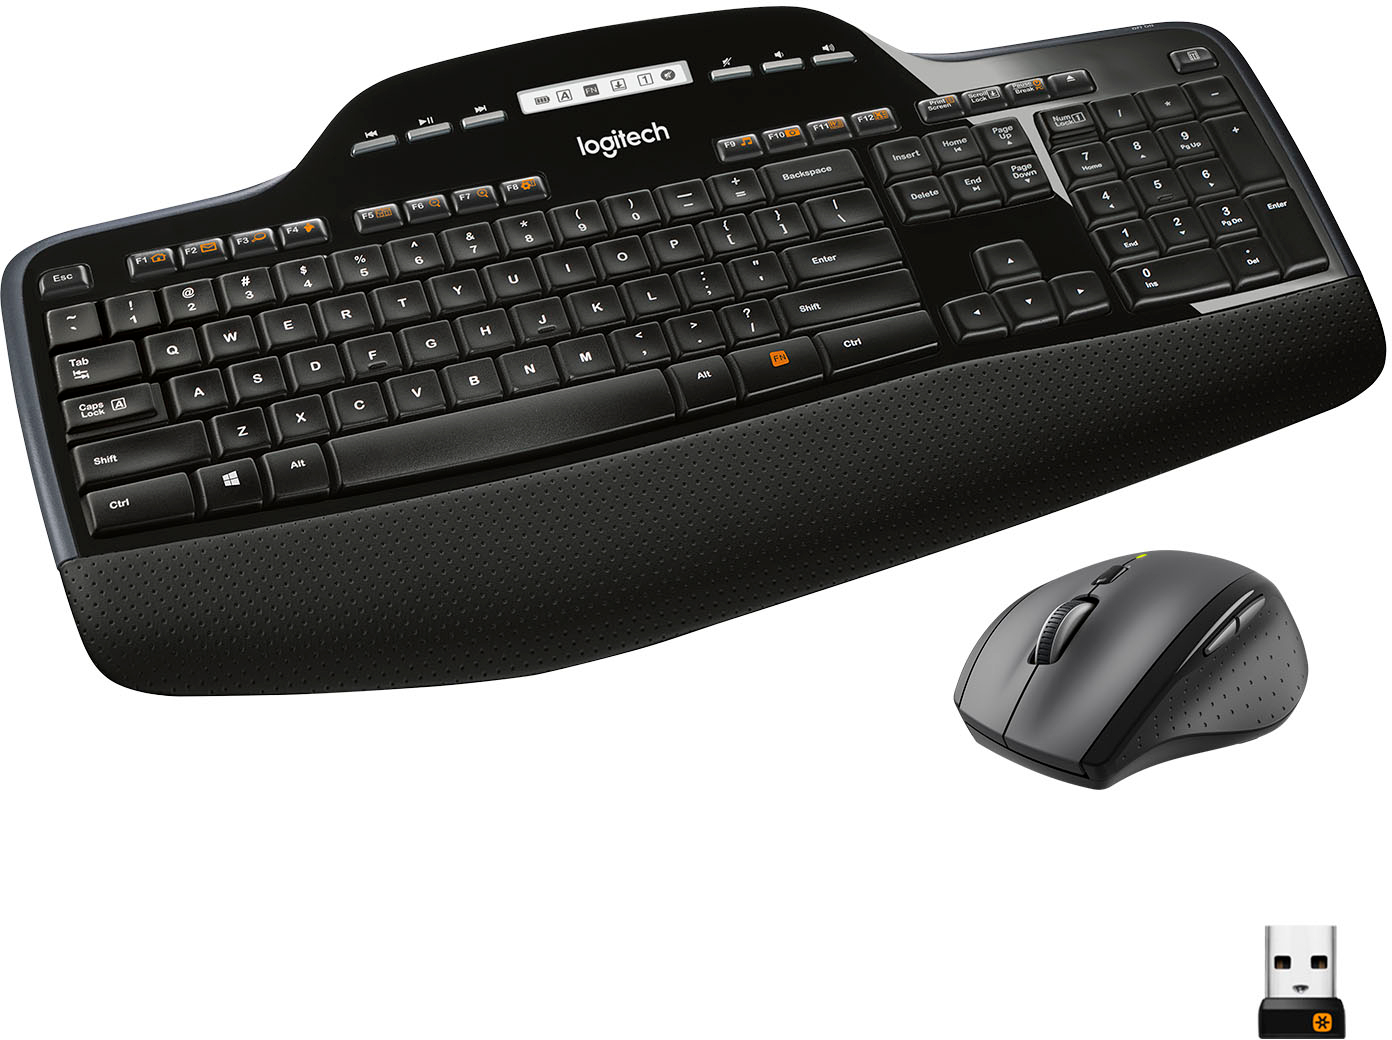 valg Ofte talt hage Logitech MK710 Full-size Wireless Keyboard and Mouse Bundle for Windows  with 3-Year Battery Life Black 920-002416 - Best Buy